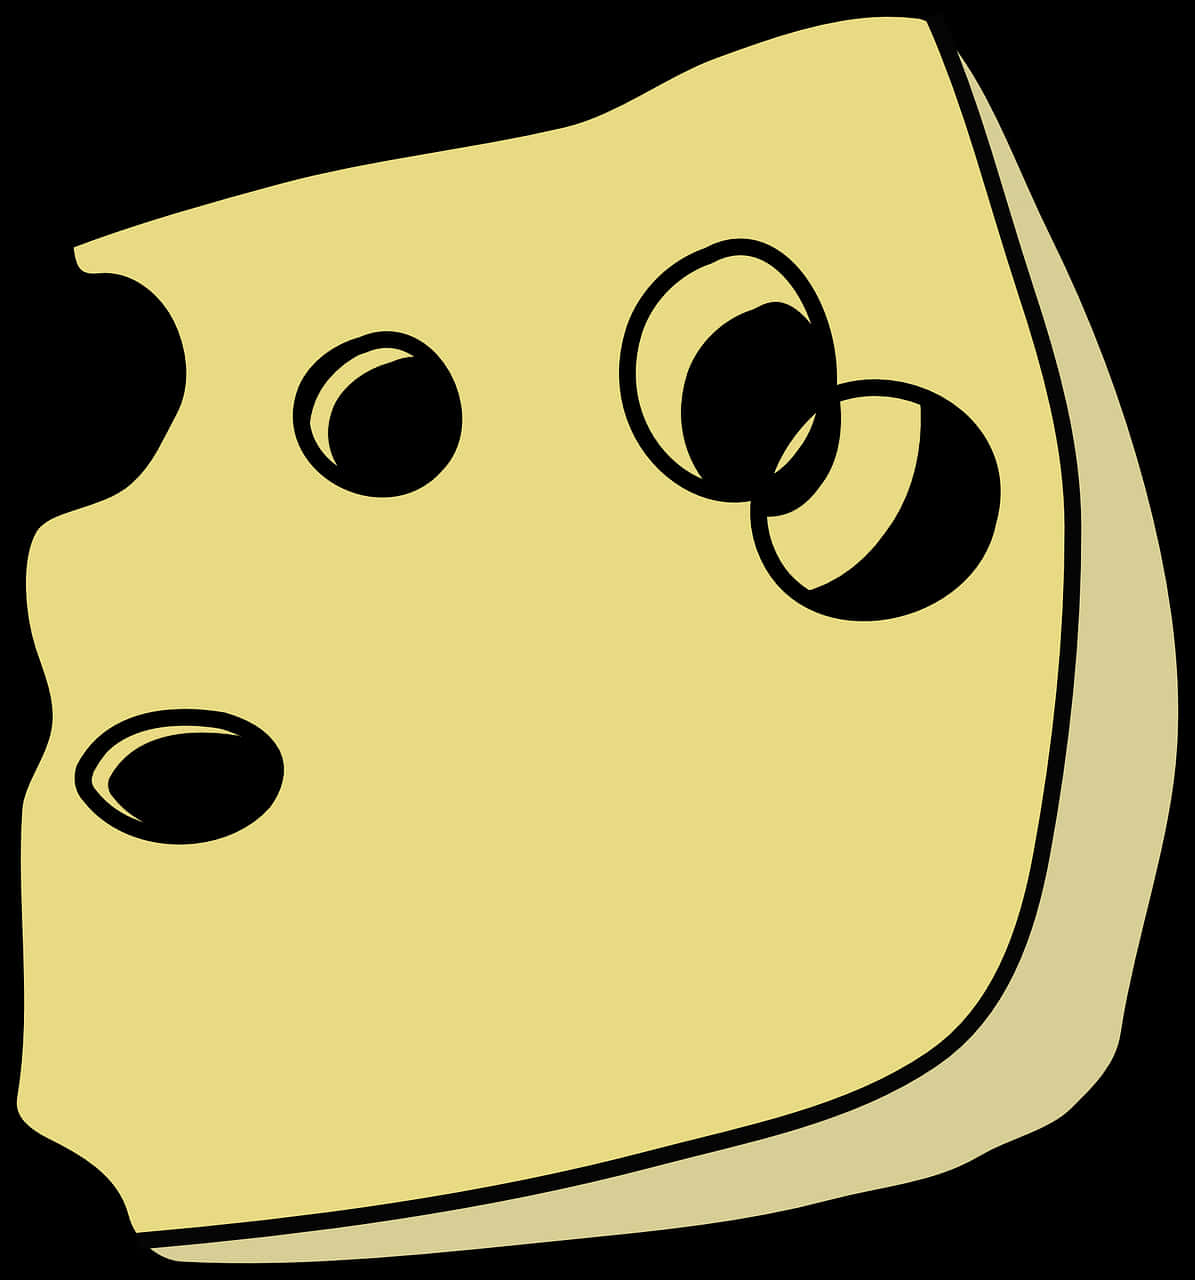 Cartoon Cheese Wedge Graphic PNG image